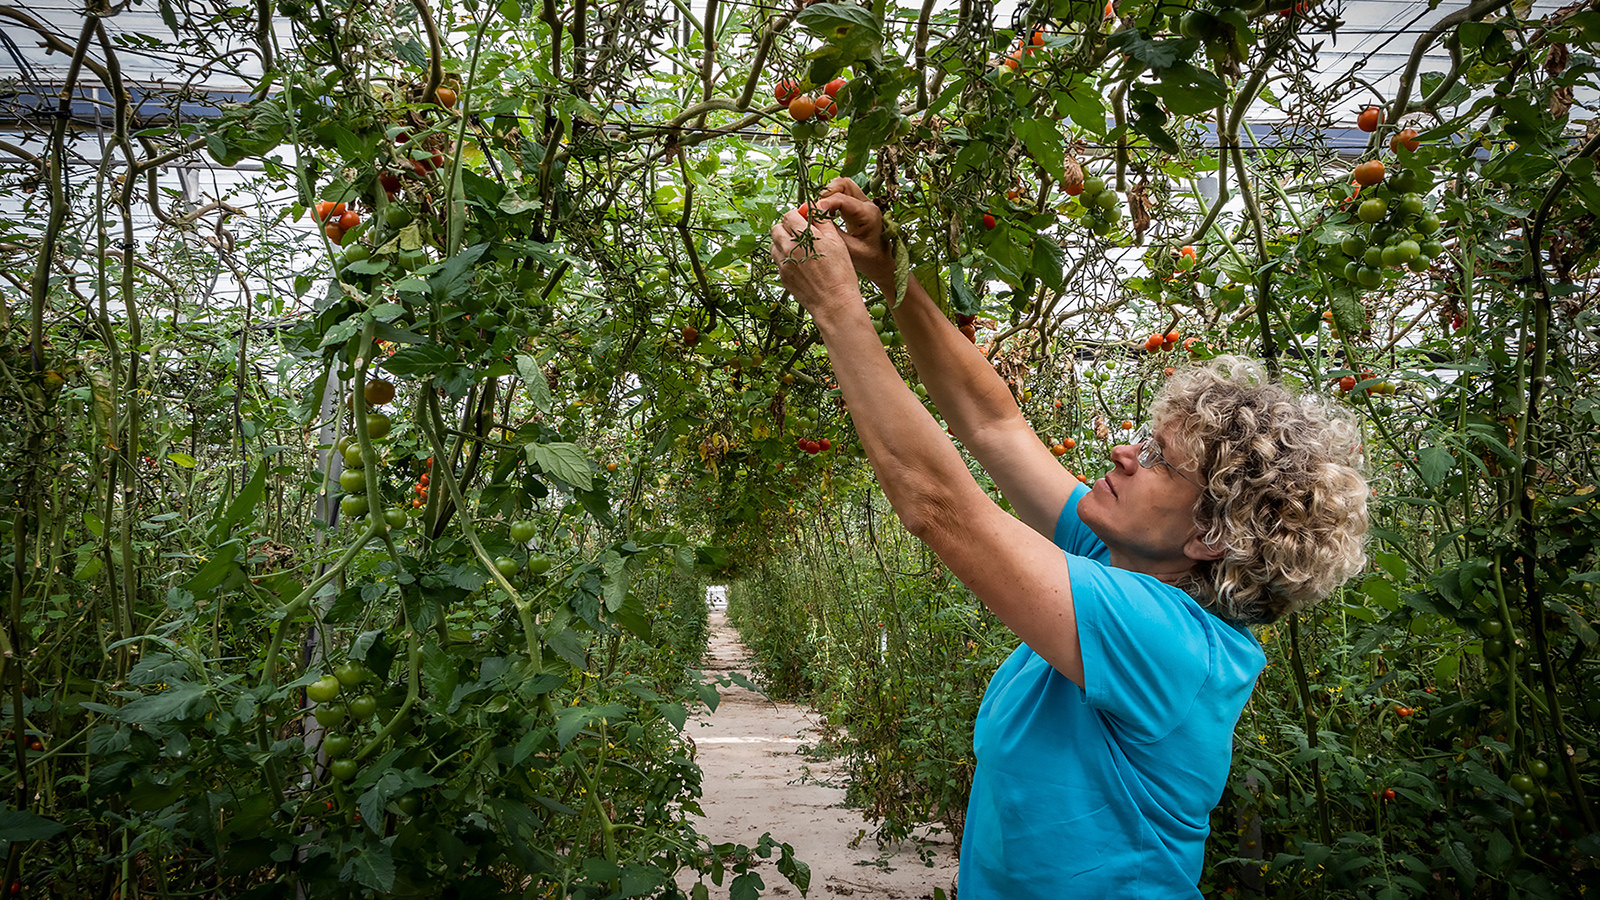 Lola grows sustainable tomatoes and peppers in the Plastic Sea in Almería